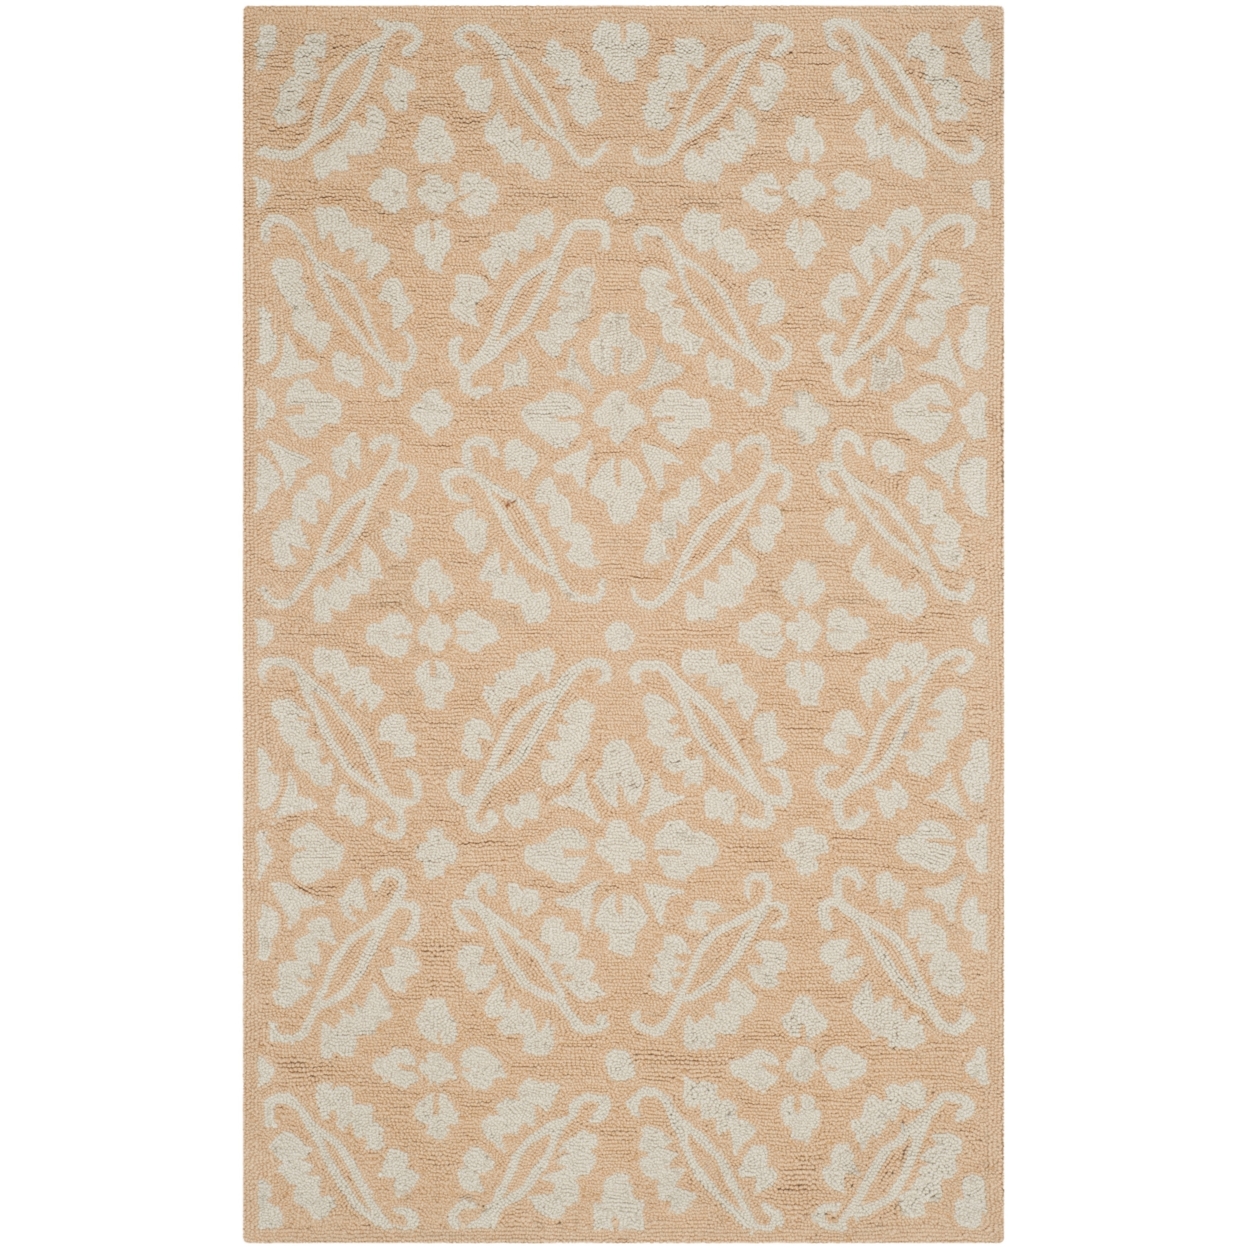 SAFAVIEH Chelsea Collection HK723C Hand-hooked Blush Rug - 2' 6 X 4'